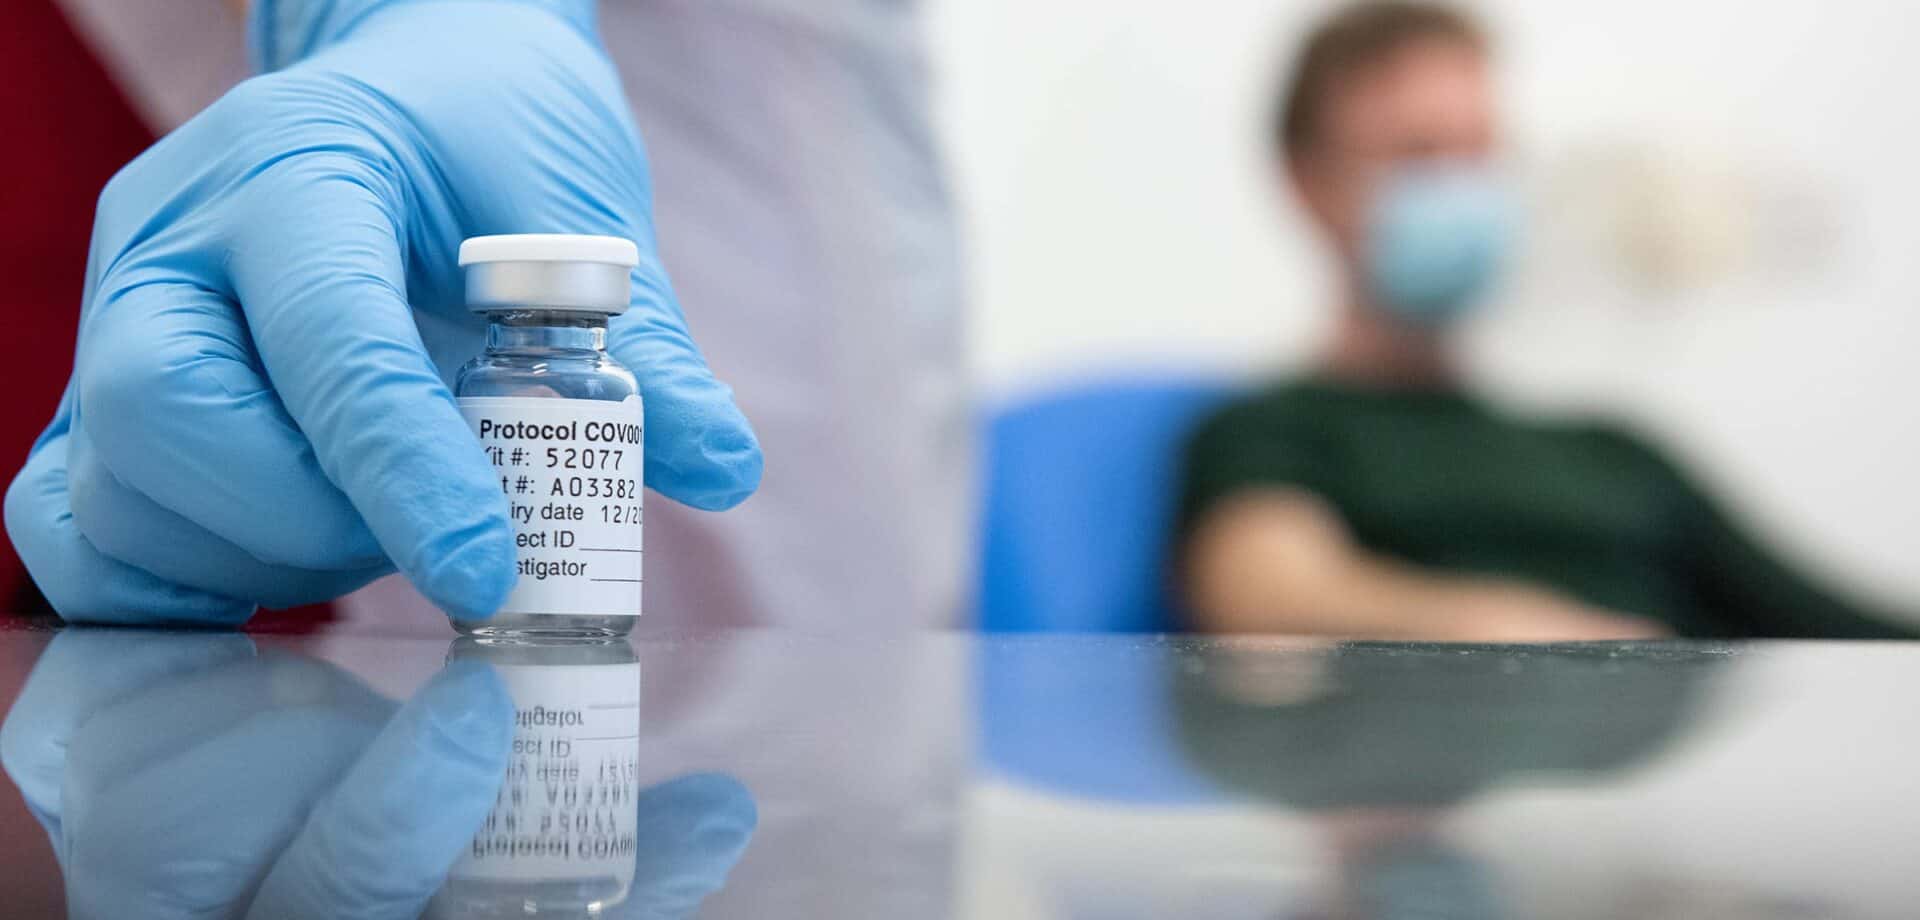 Healthcare professional in blue gloves holding a vial of the COVID-19 vaccine with a patient wearing a mask in the background.